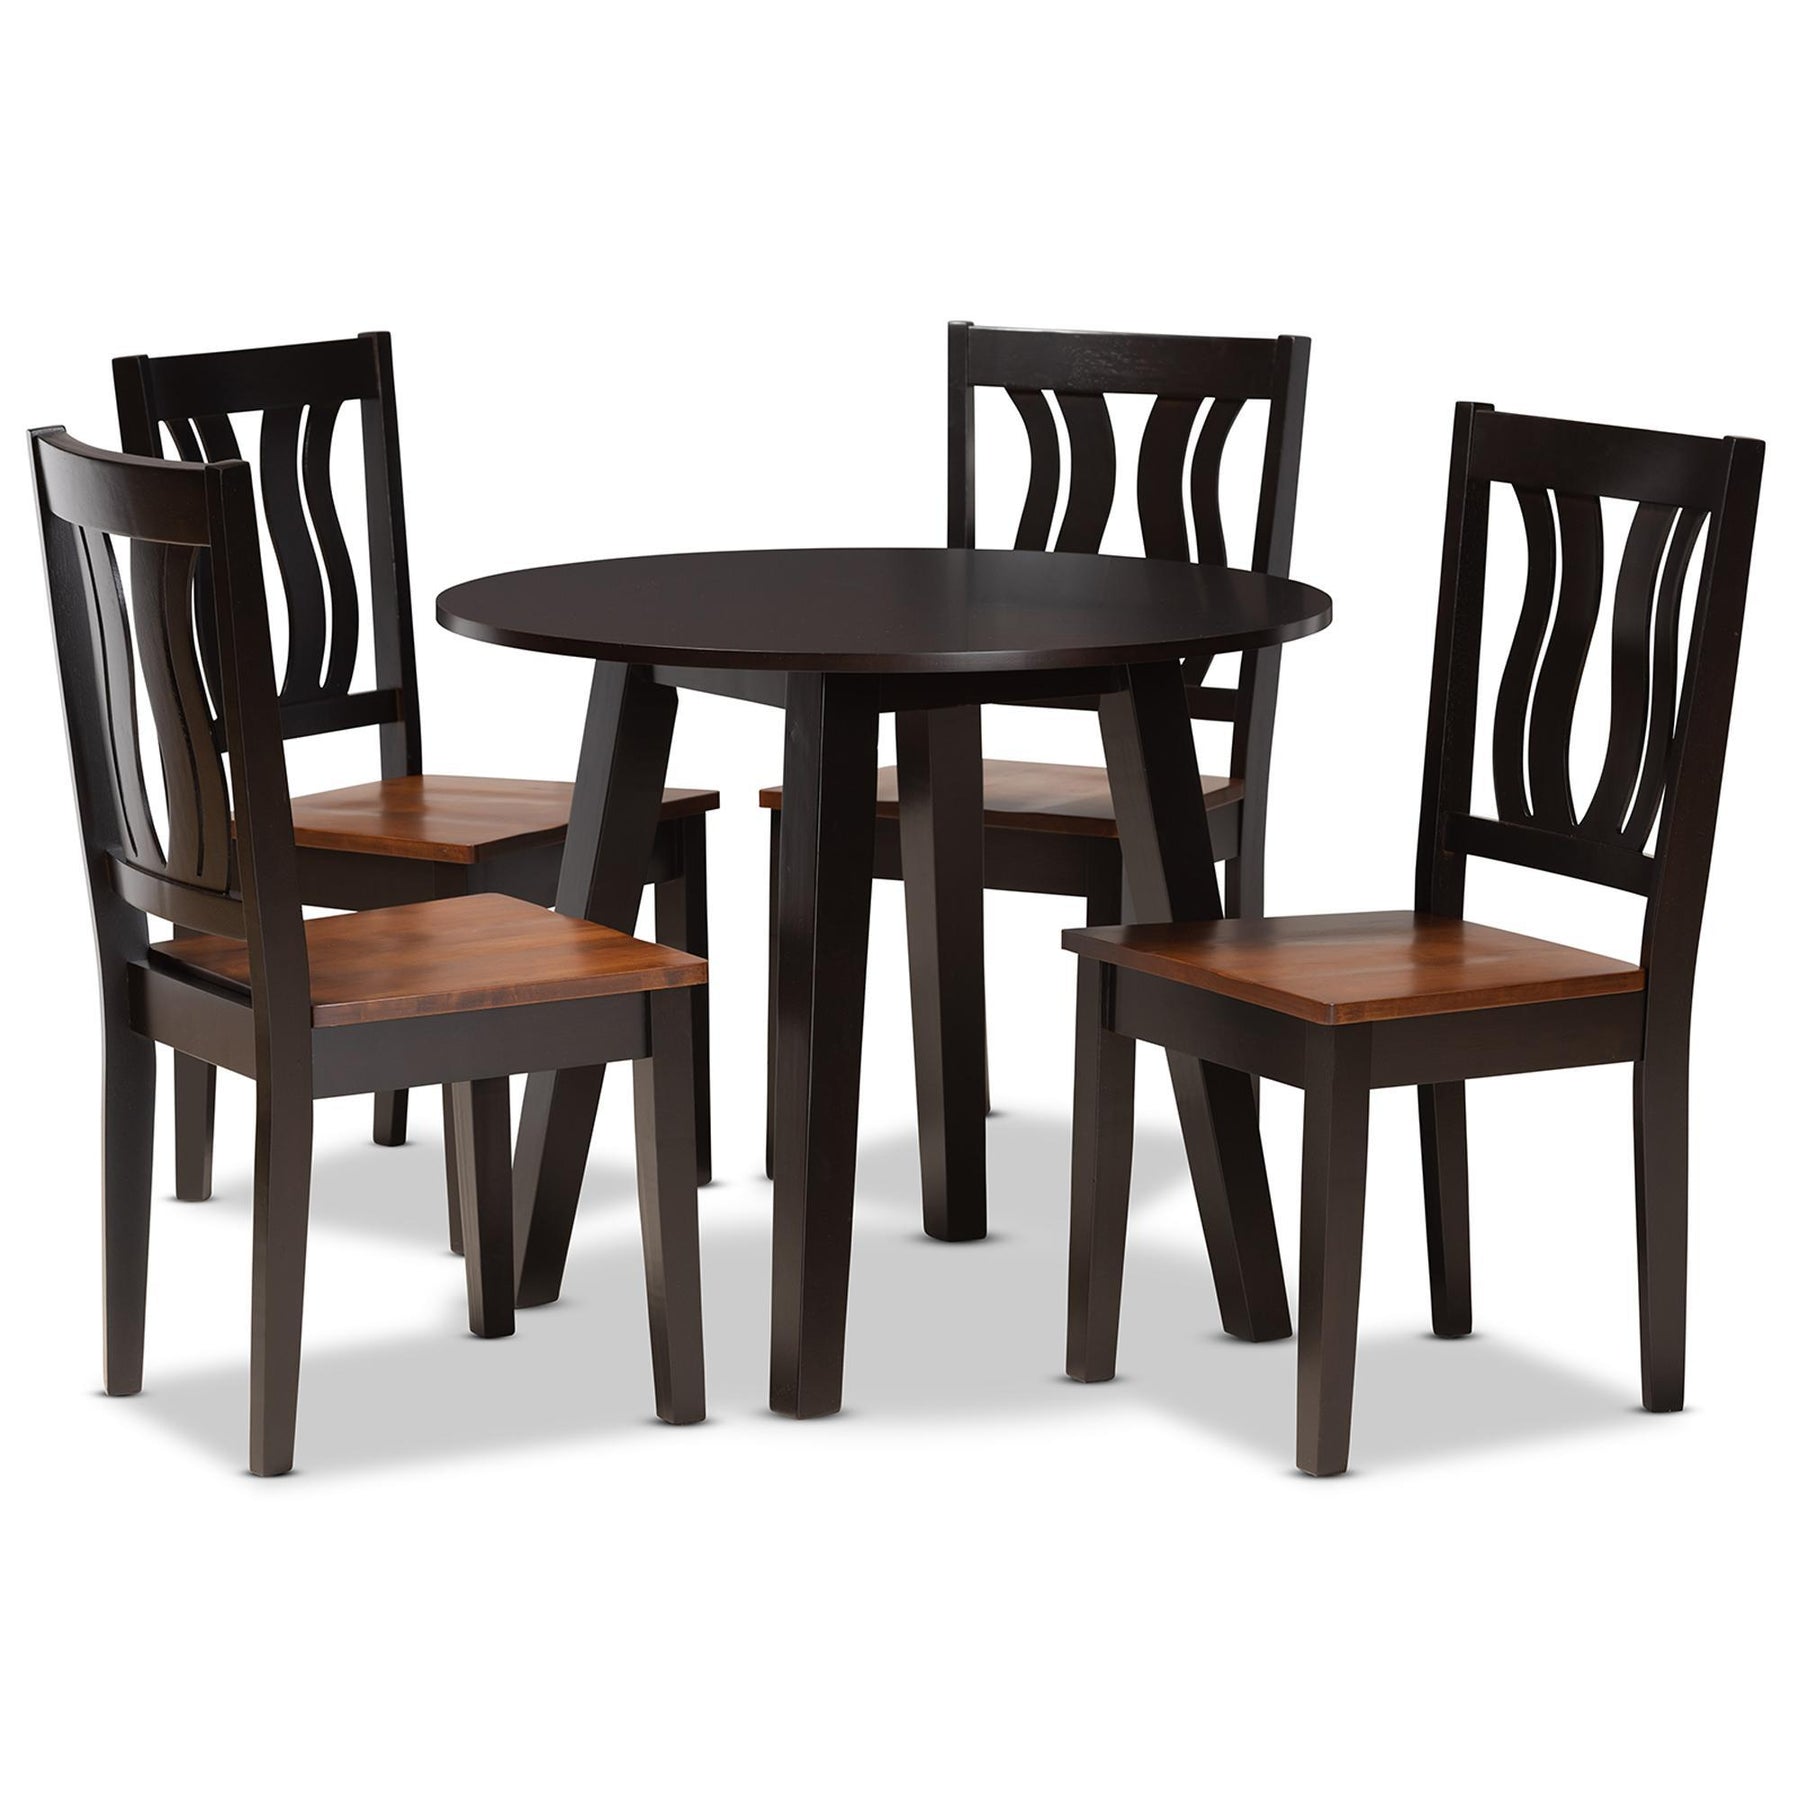 Baxton Studio Anesa Modern And Contemporary Transitional Two-Tone Dark Brown And Walnut Brown Finished Wood 5-Piece Dining Set - Anesa-Dark Brown/Walnut-5PC Dining Set